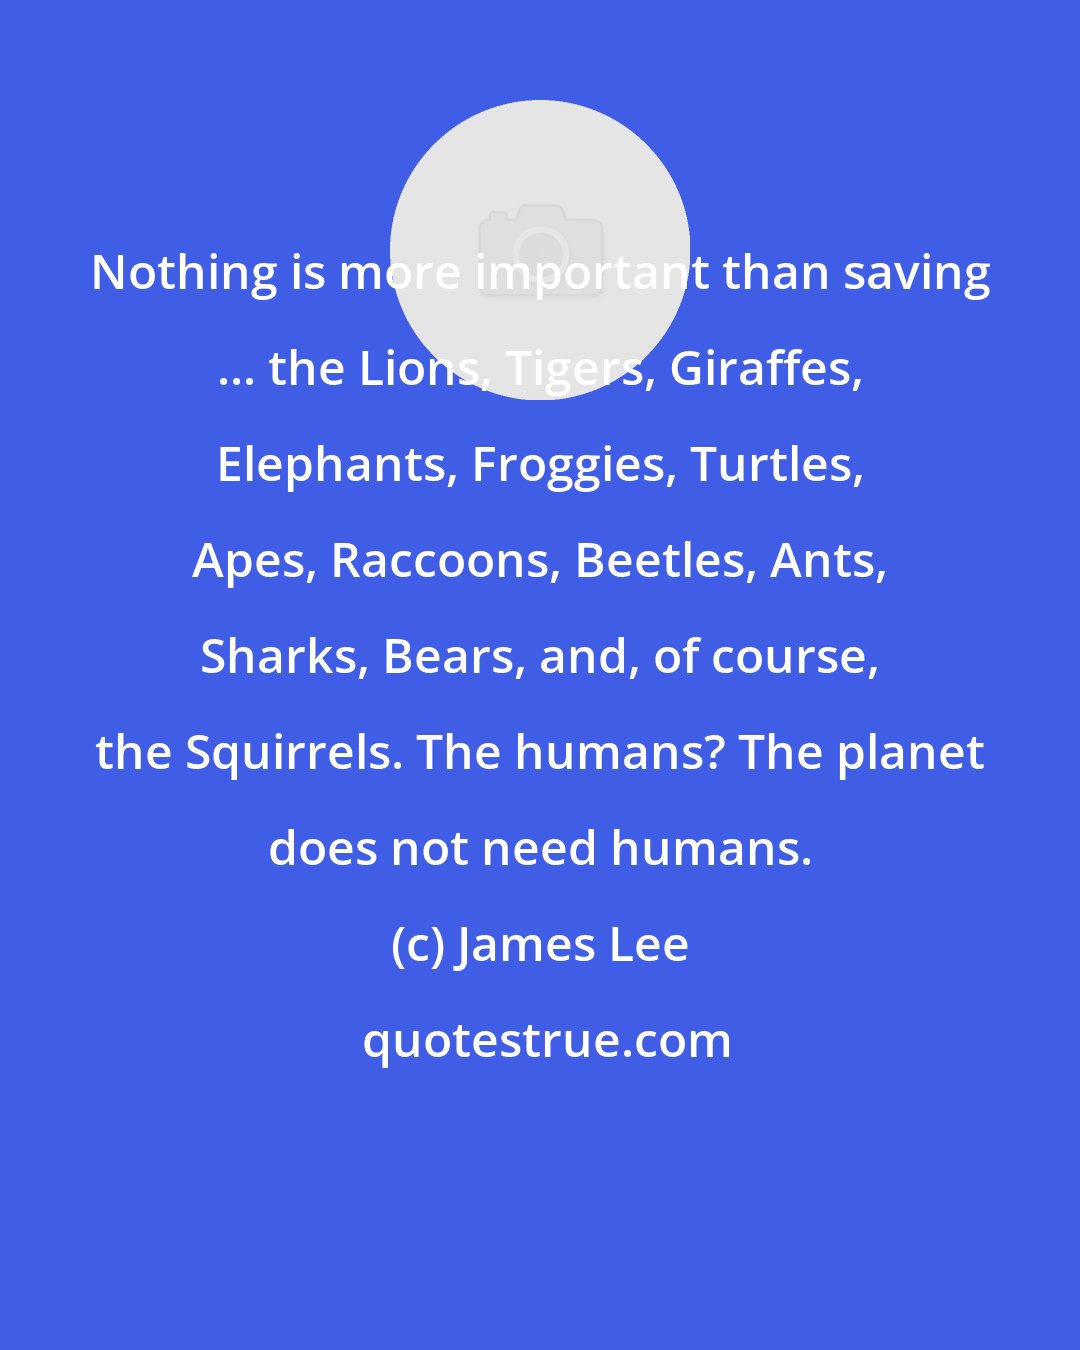 James Lee: Nothing is more important than saving ... the Lions, Tigers, Giraffes, Elephants, Froggies, Turtles, Apes, Raccoons, Beetles, Ants, Sharks, Bears, and, of course, the Squirrels. The humans? The planet does not need humans.